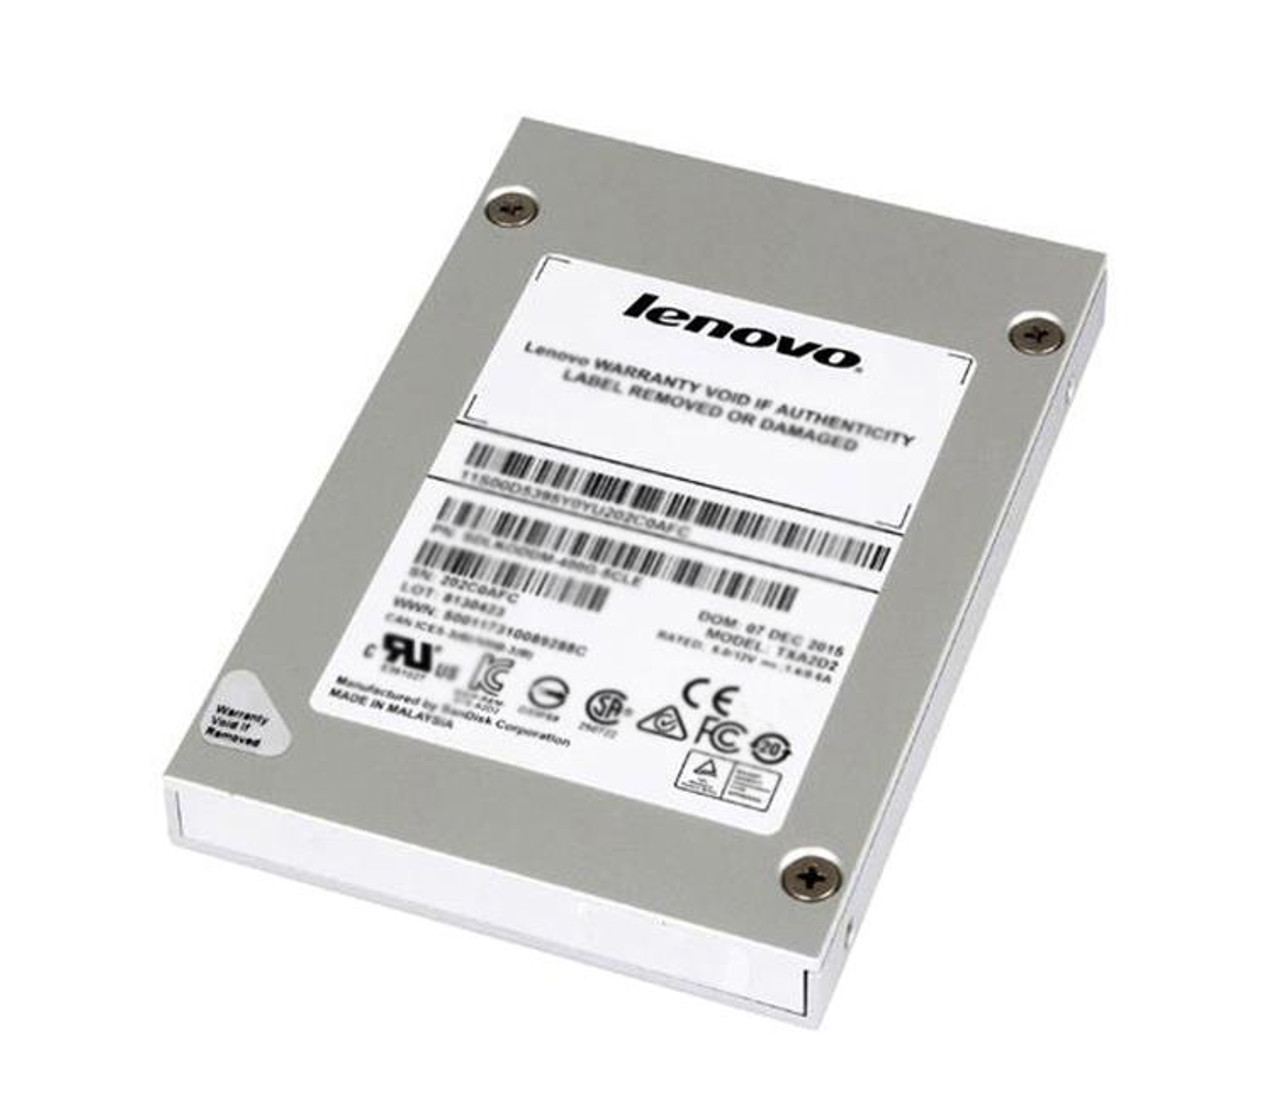 00XH246 Lenovo 240GB SATA 6Gbps Hot Swap 2.5-inch Internal Solid State Drive (SSD) for ThinkServer TS460